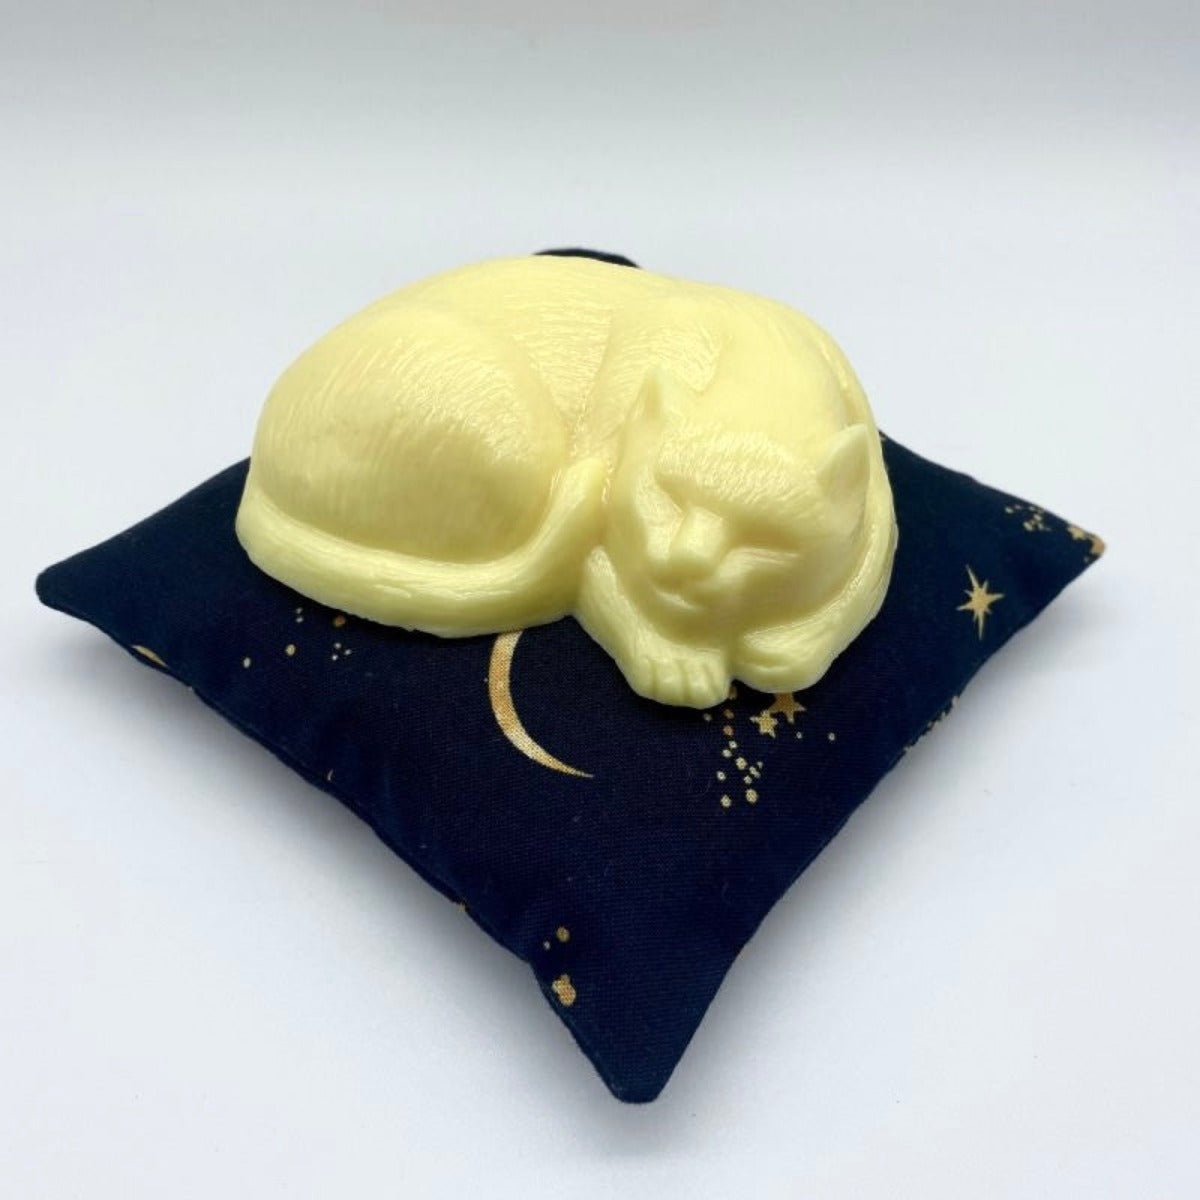 Yellow sleeping cat-shaped soap on a navy blue celestial print square pillow